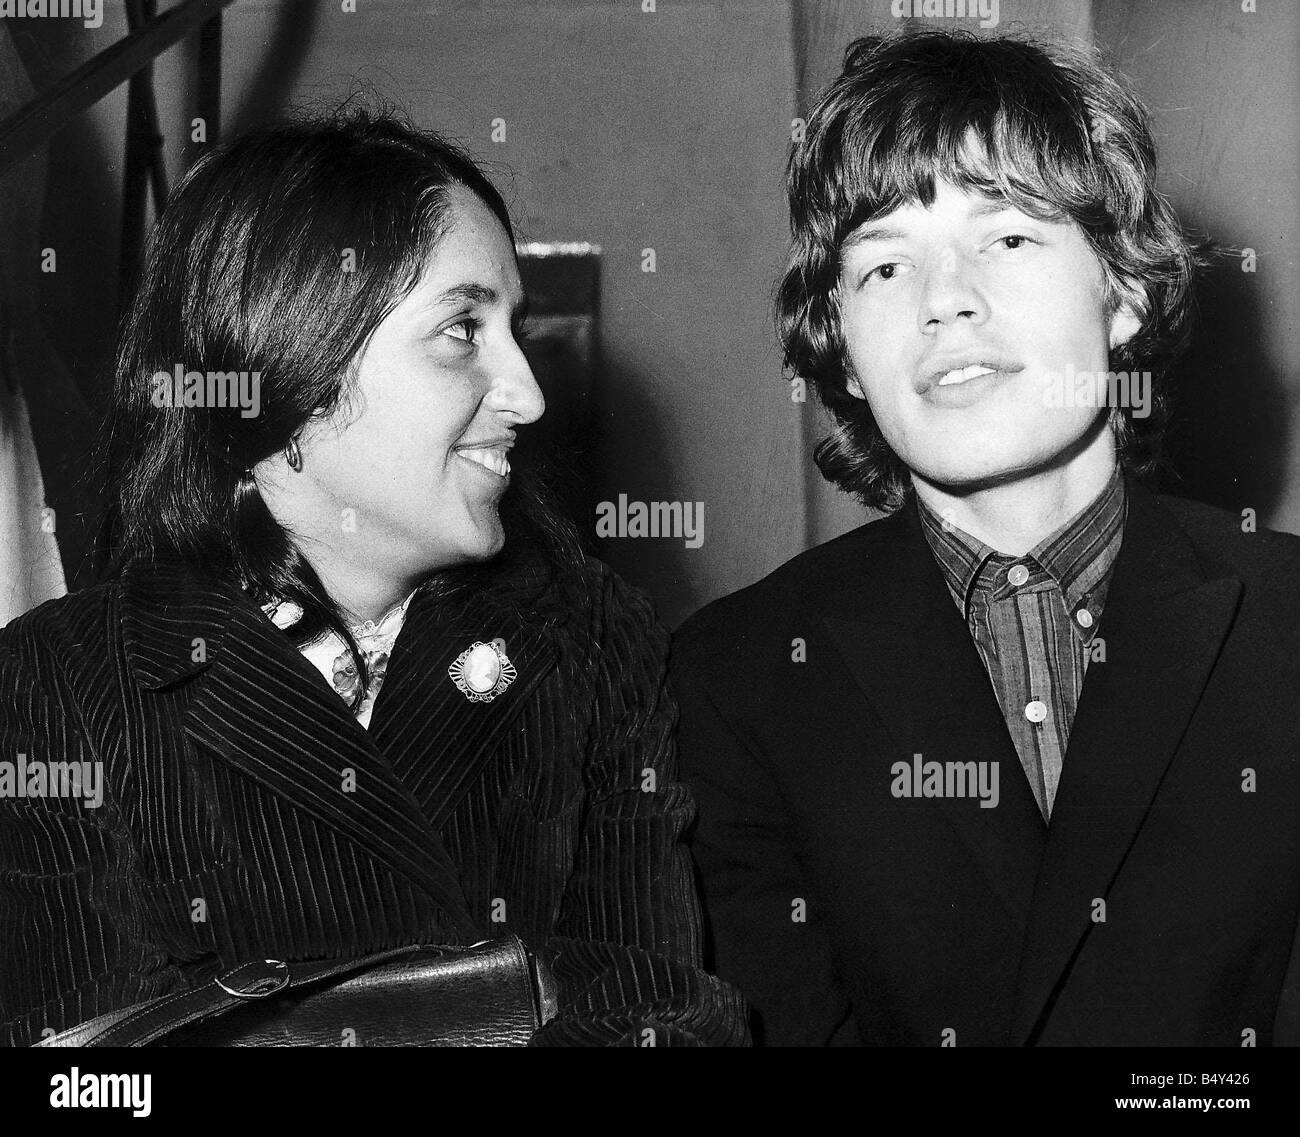 Joan Baez American folk singer famous for protest songs anti Vietnam war meets Mick Jagger Pop Singer of the Rolling Stones in Glasgow in 1965 Stock Photo